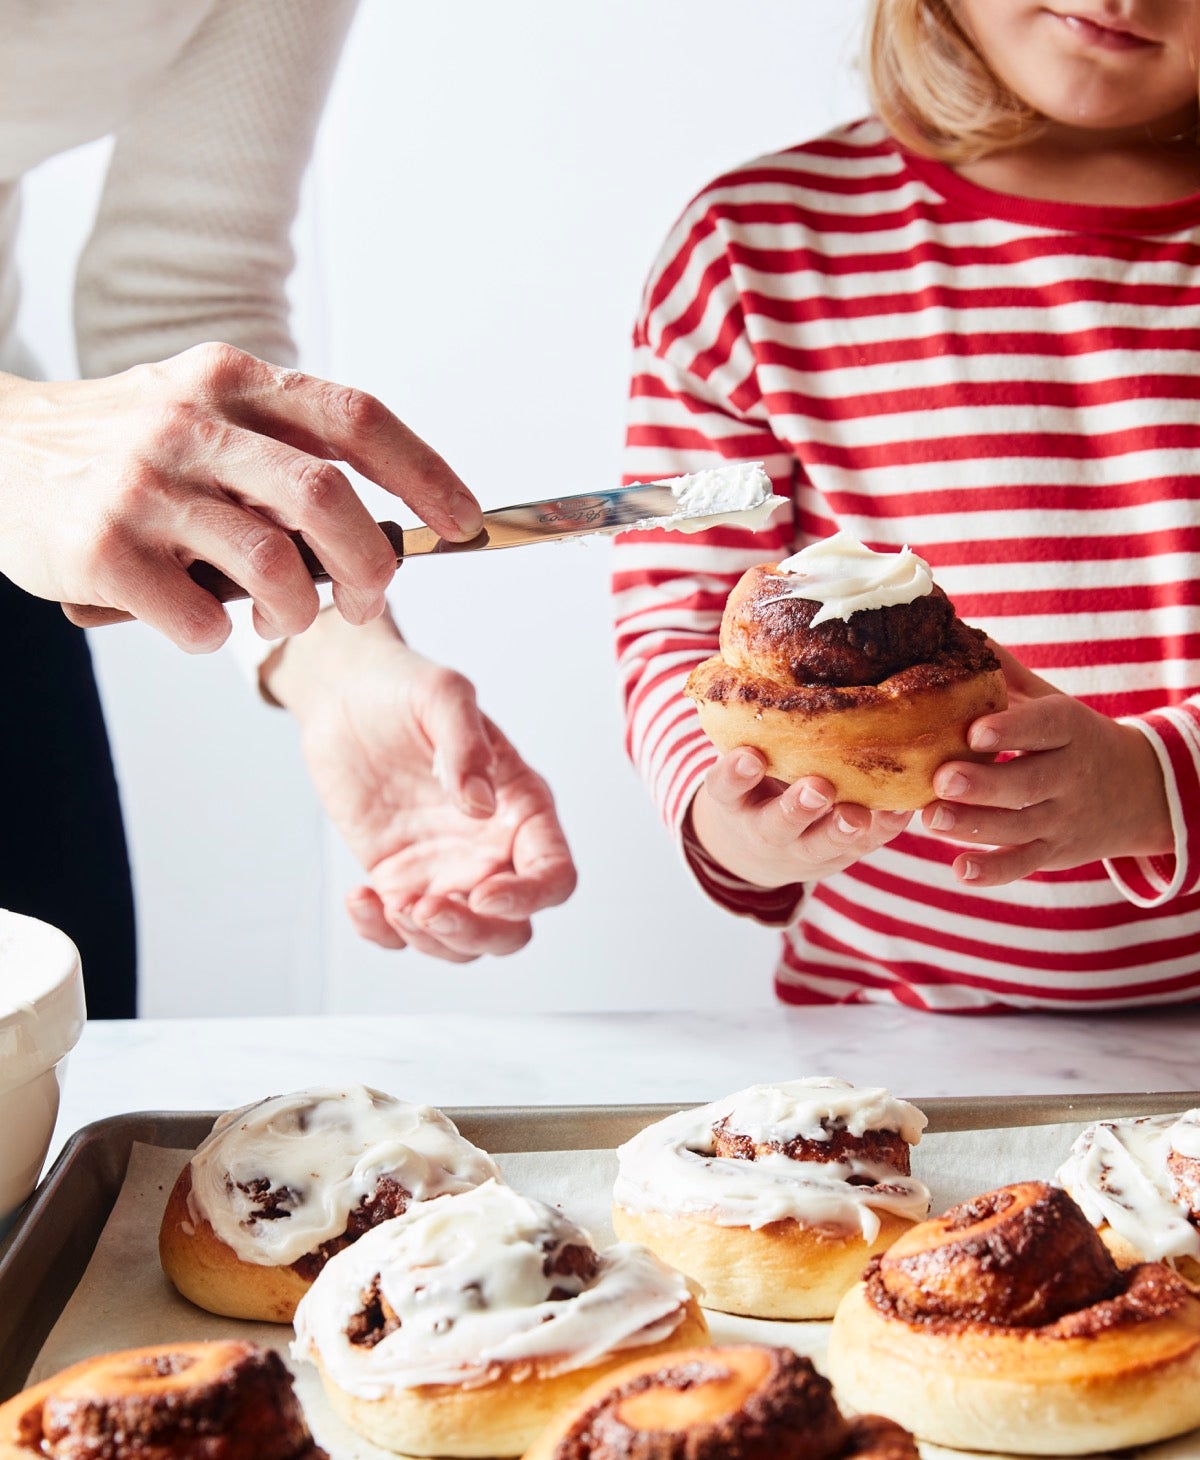 Little girl in a red-striped shirt holding a cinnamon roll while Mom frosts it with white icing.